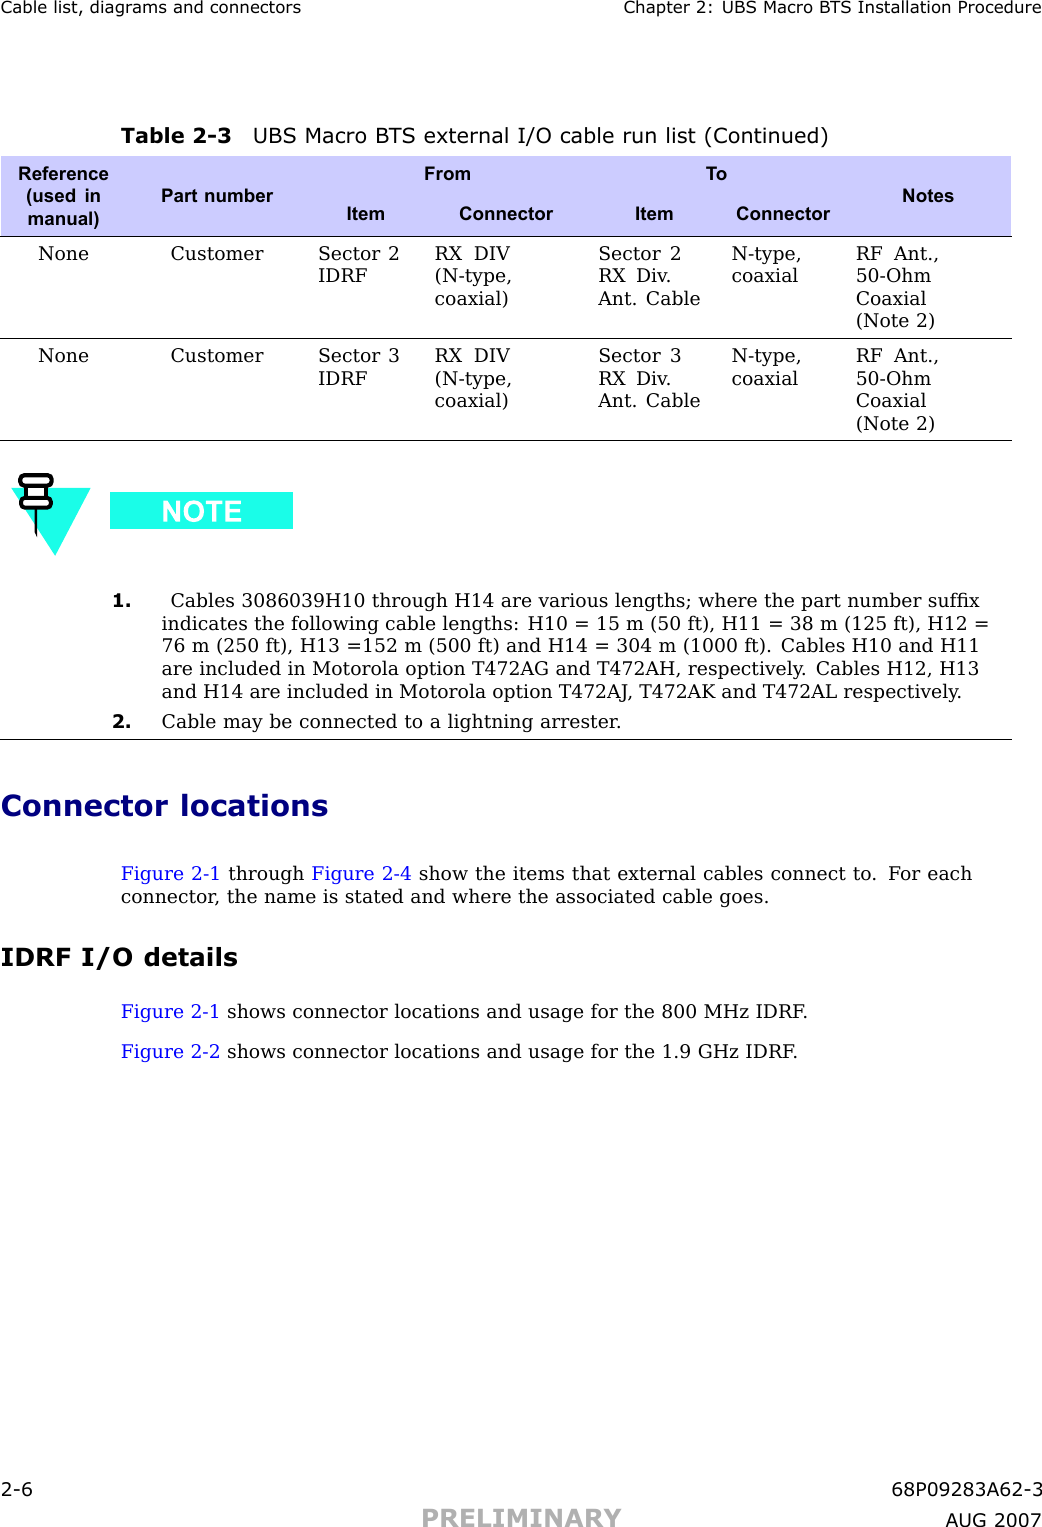 Cable list, diagr ams and connectors Chapter 2: UBS Macro B T S Installation ProcedureTable 2 -3 UBS Macro B T S external I/O cable run list (Continued)From T oReference(used inmanual)Part numberItemConnectorItemConnectorNotesNoneCustomer Sector 2IDRFRX DIV(N-type,coaxial)Sector 2RX Div .Ant. CableN-type,coaxialRF Ant.,50-OhmCoaxial(Note 2)NoneCustomer Sector 3IDRFRX DIV(N-type,coaxial)Sector 3RX Div .Ant. CableN-type,coaxialRF Ant.,50-OhmCoaxial(Note 2)1. Cables 3086039H10 through H14 are various lengths; where the part number sufﬁxindicates the following cable lengths: H10 = 15 m (50 ft), H11 = 38 m (125 ft), H12 =76 m (250 ft), H13 =152 m (500 ft) and H14 = 304 m (1000 ft). Cables H10 and H11are included in Motorola option T472AG and T472AH, respectively . Cables H12, H13and H14 are included in Motorola option T472AJ , T472AK and T472AL respectively .2. Cable may be connected to a lightning arrester .Connector locationsFigure 2 -1 through Figure 2 -4 show the items that external cables connect to . F or eachconnector , the name is stated and where the associated cable goes.IDRF I/O detailsFigure 2 -1 shows connector locations and usage for the 800 MHz IDRF .Figure 2 -2 shows connector locations and usage for the 1.9 GHz IDRF .2 -6 68P09283A62 -3PRELIMINARY A UG 2007